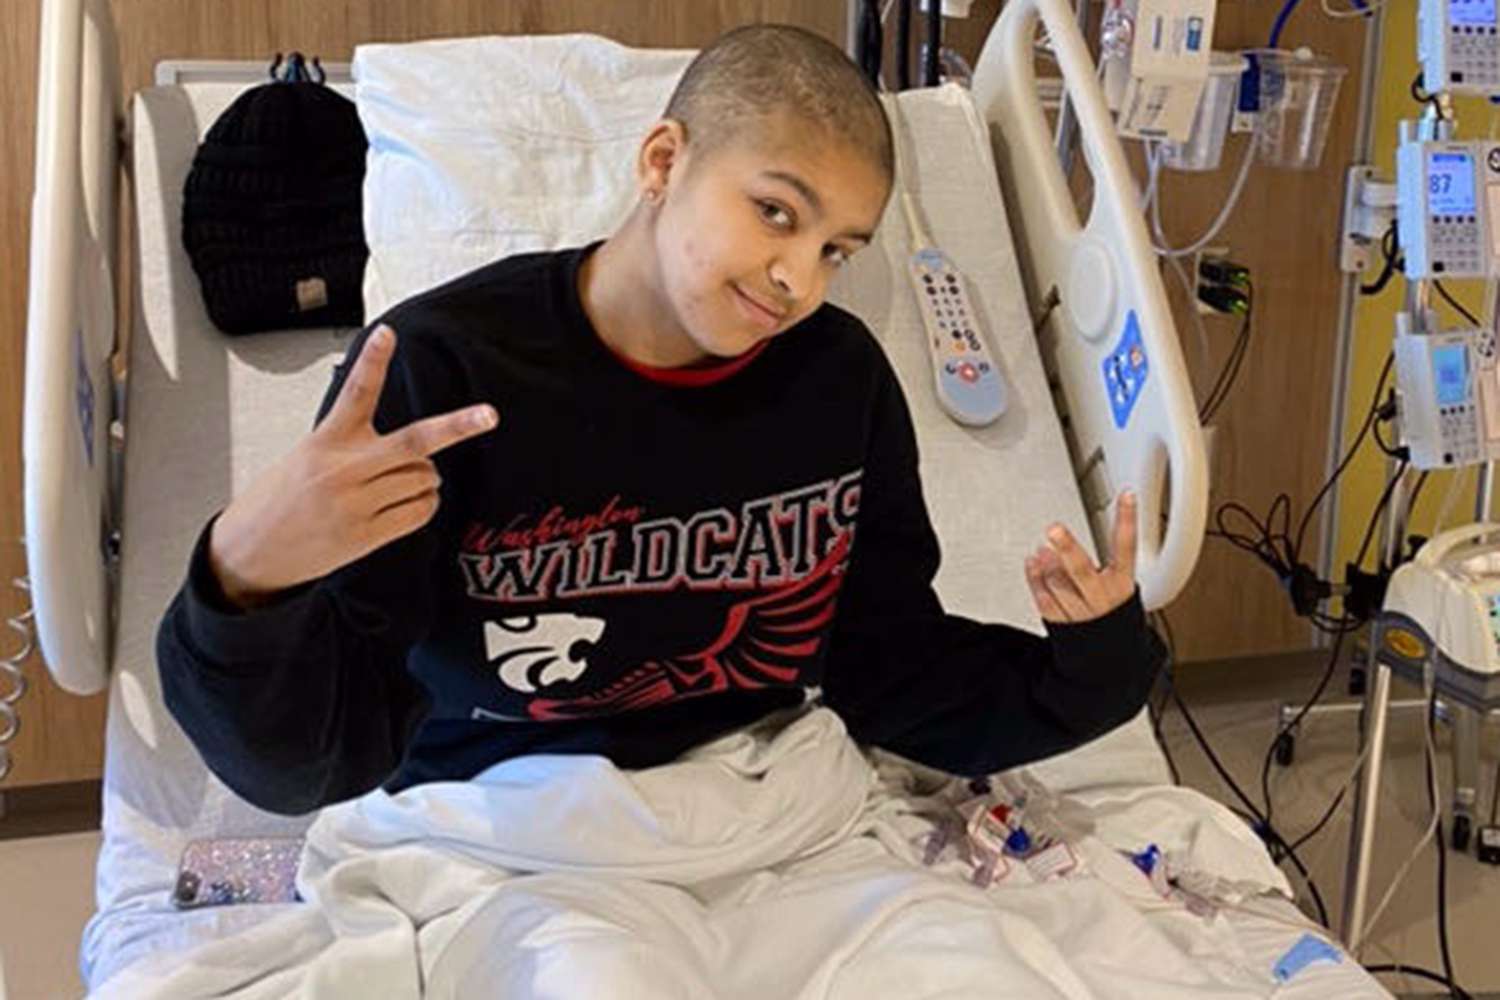 Teen Awaits Heart Transplant 3 Years After Surviving Cancer (Exclusive) [Video]